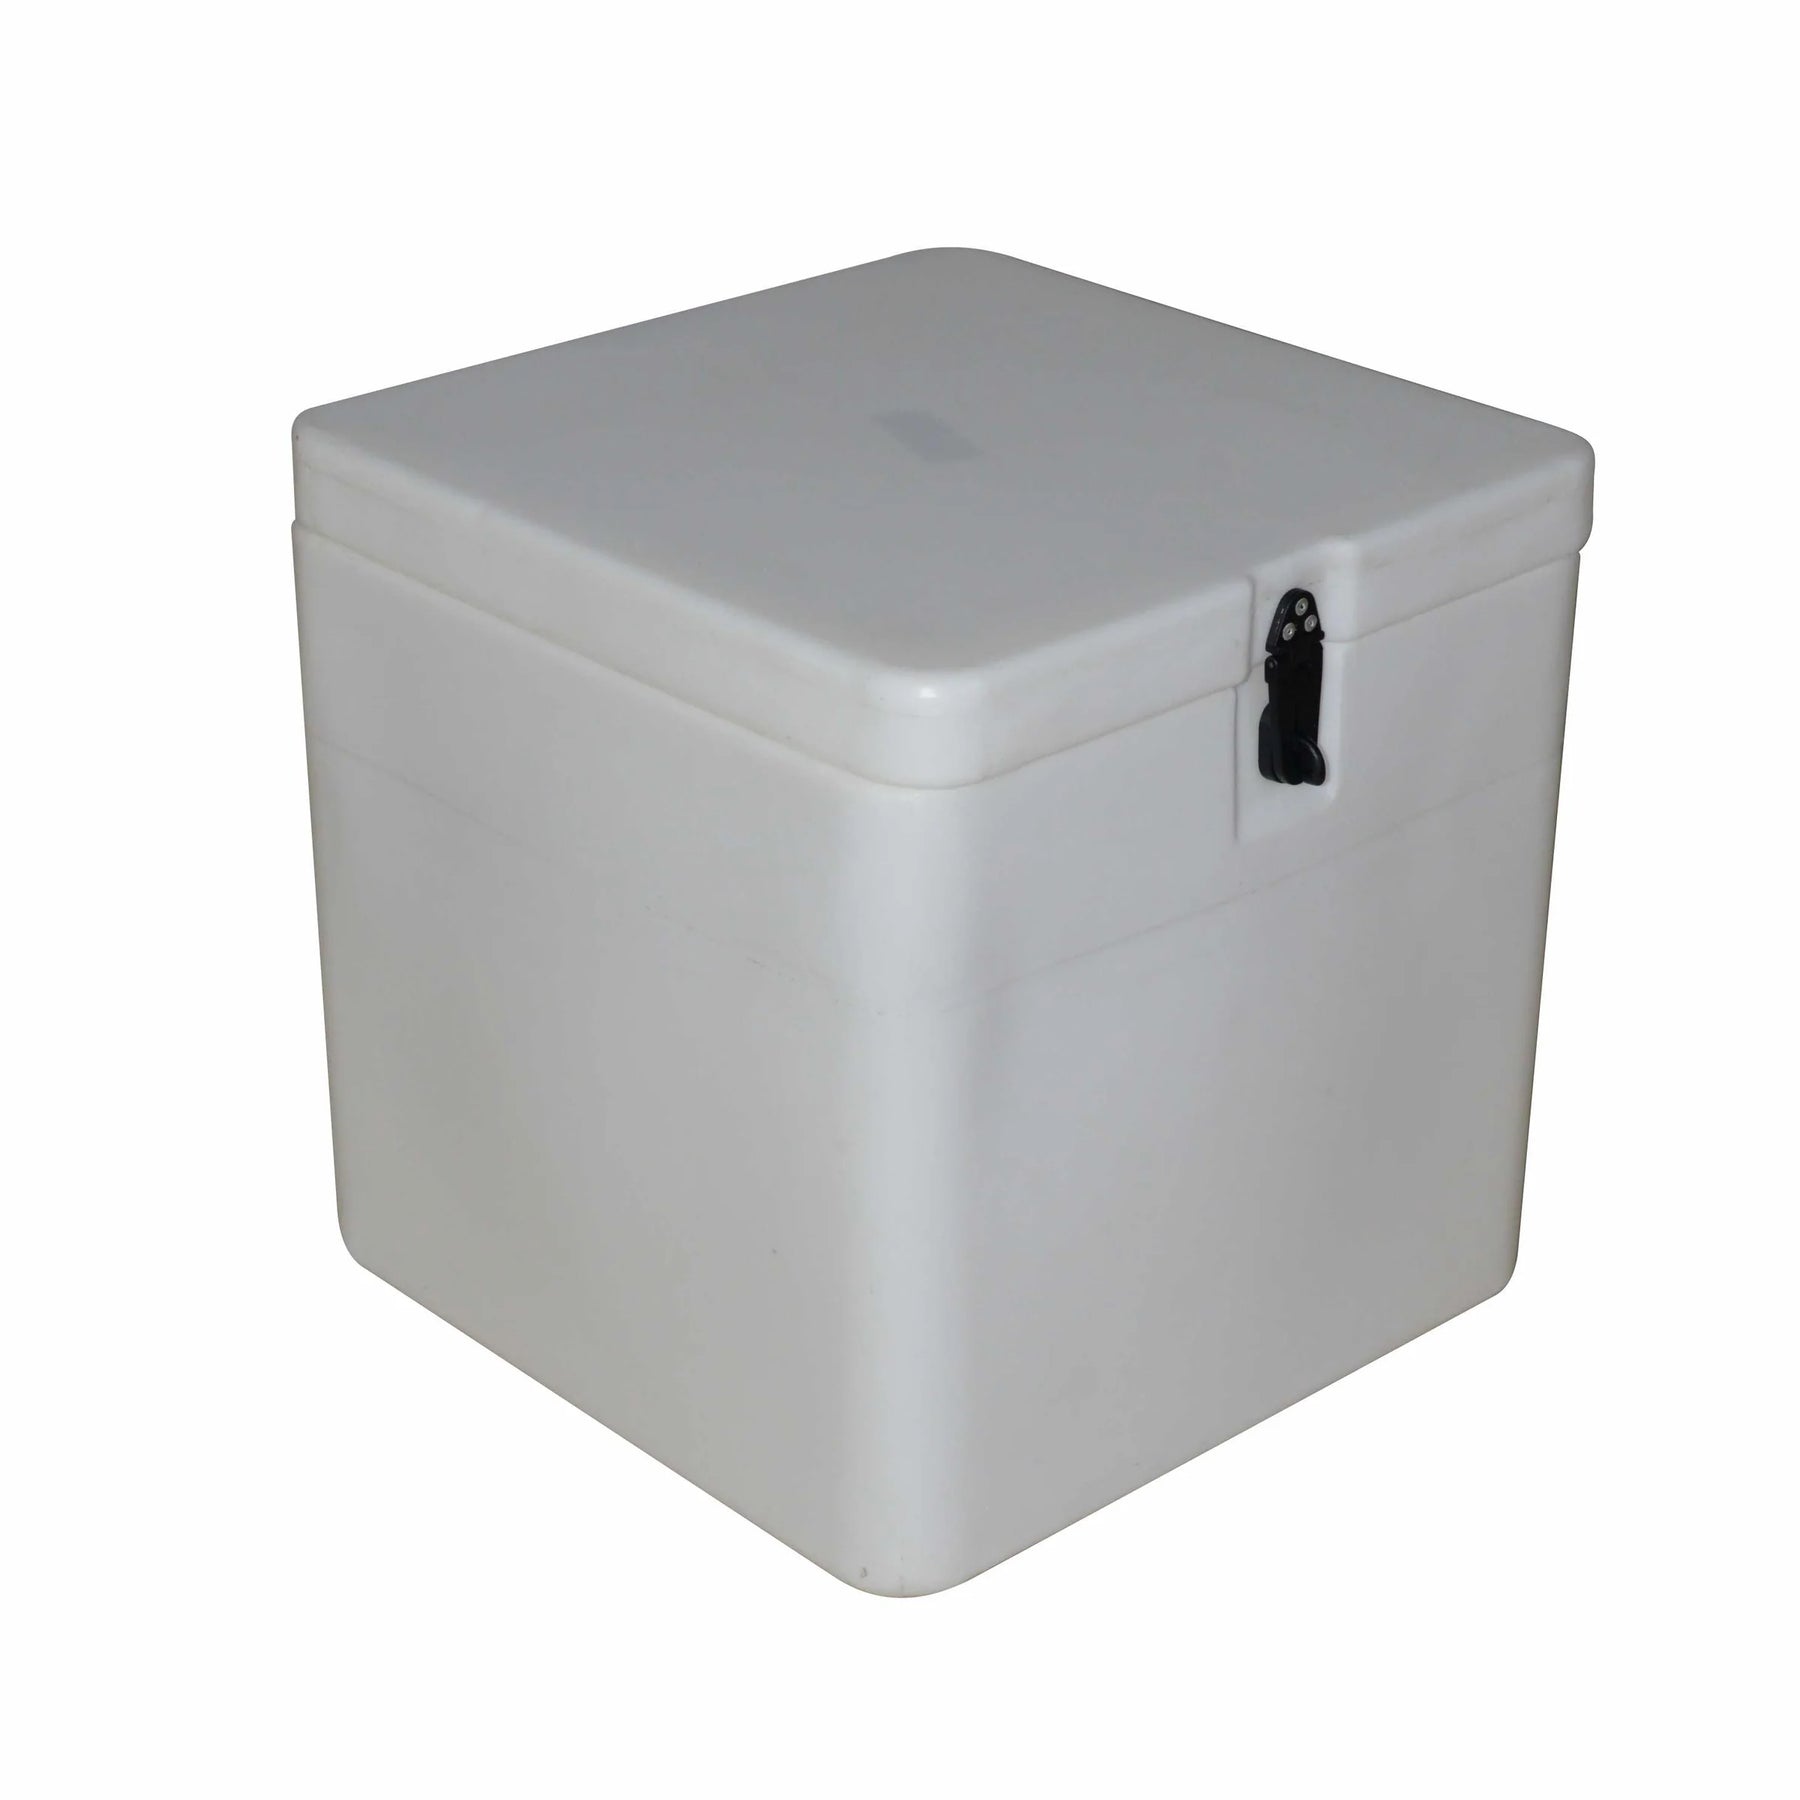 Plastic Delivery Boxes: What Can You Use Them for and Where to Buy Them